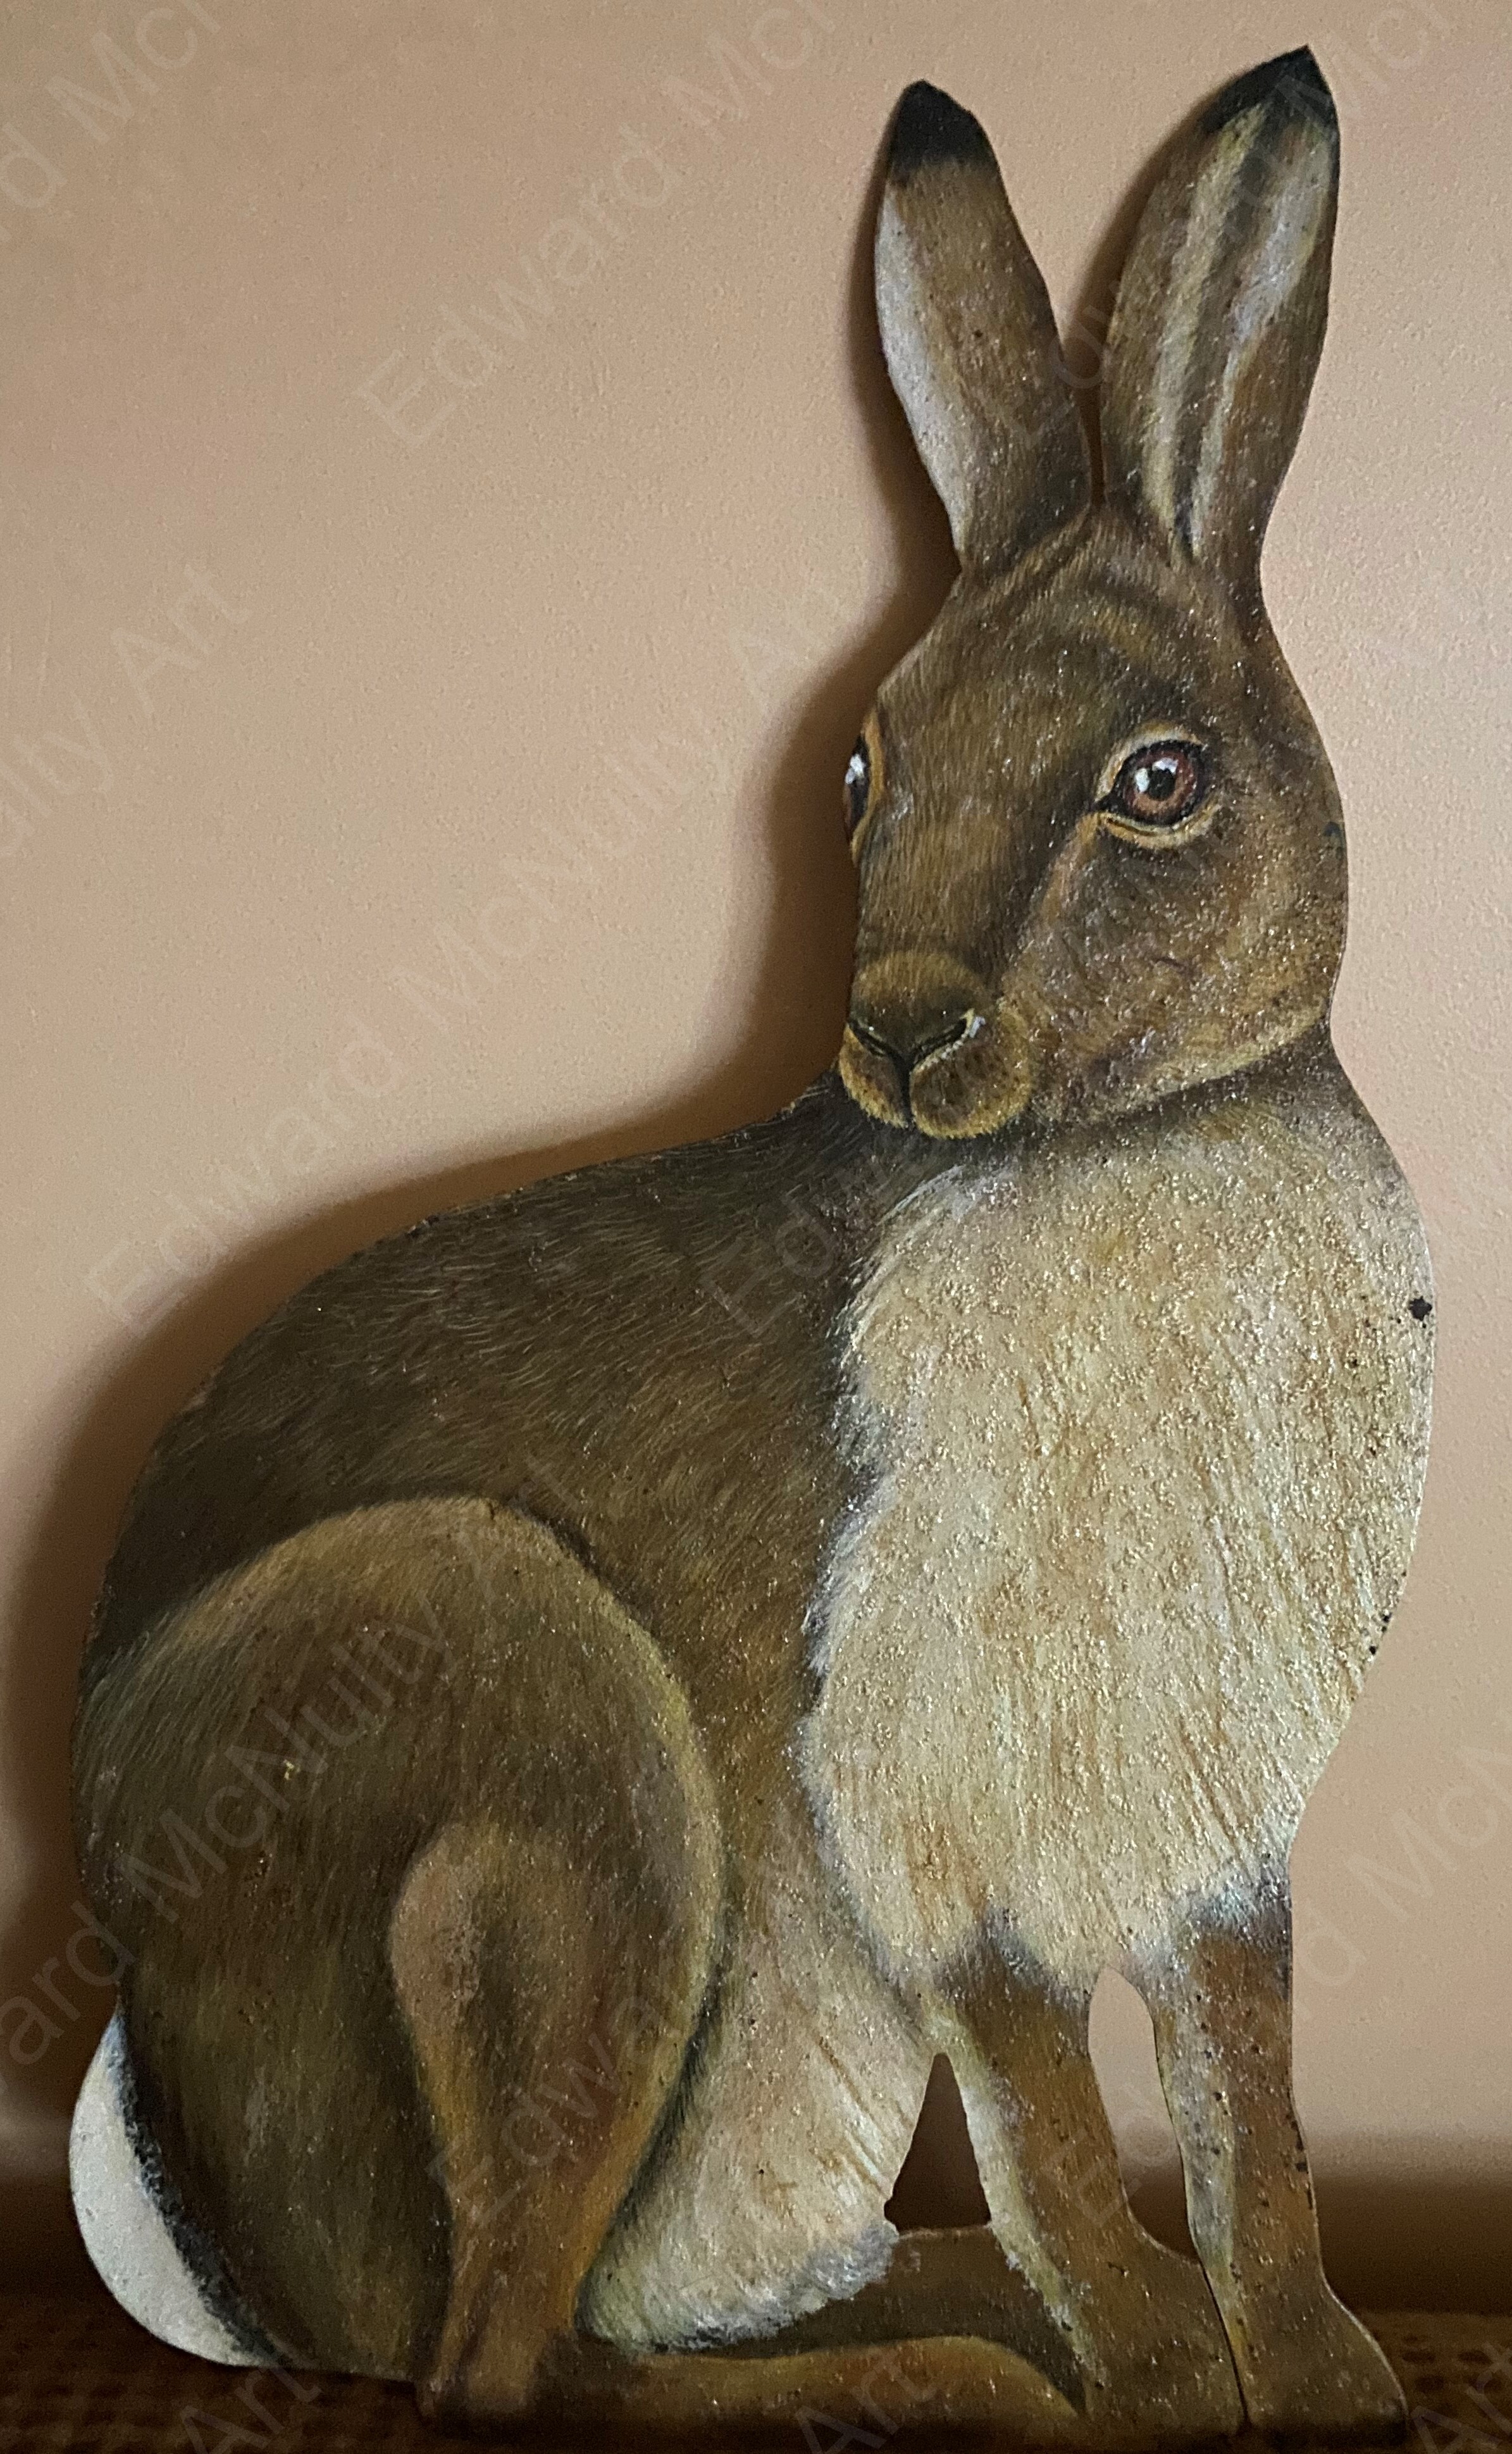 The Hare 